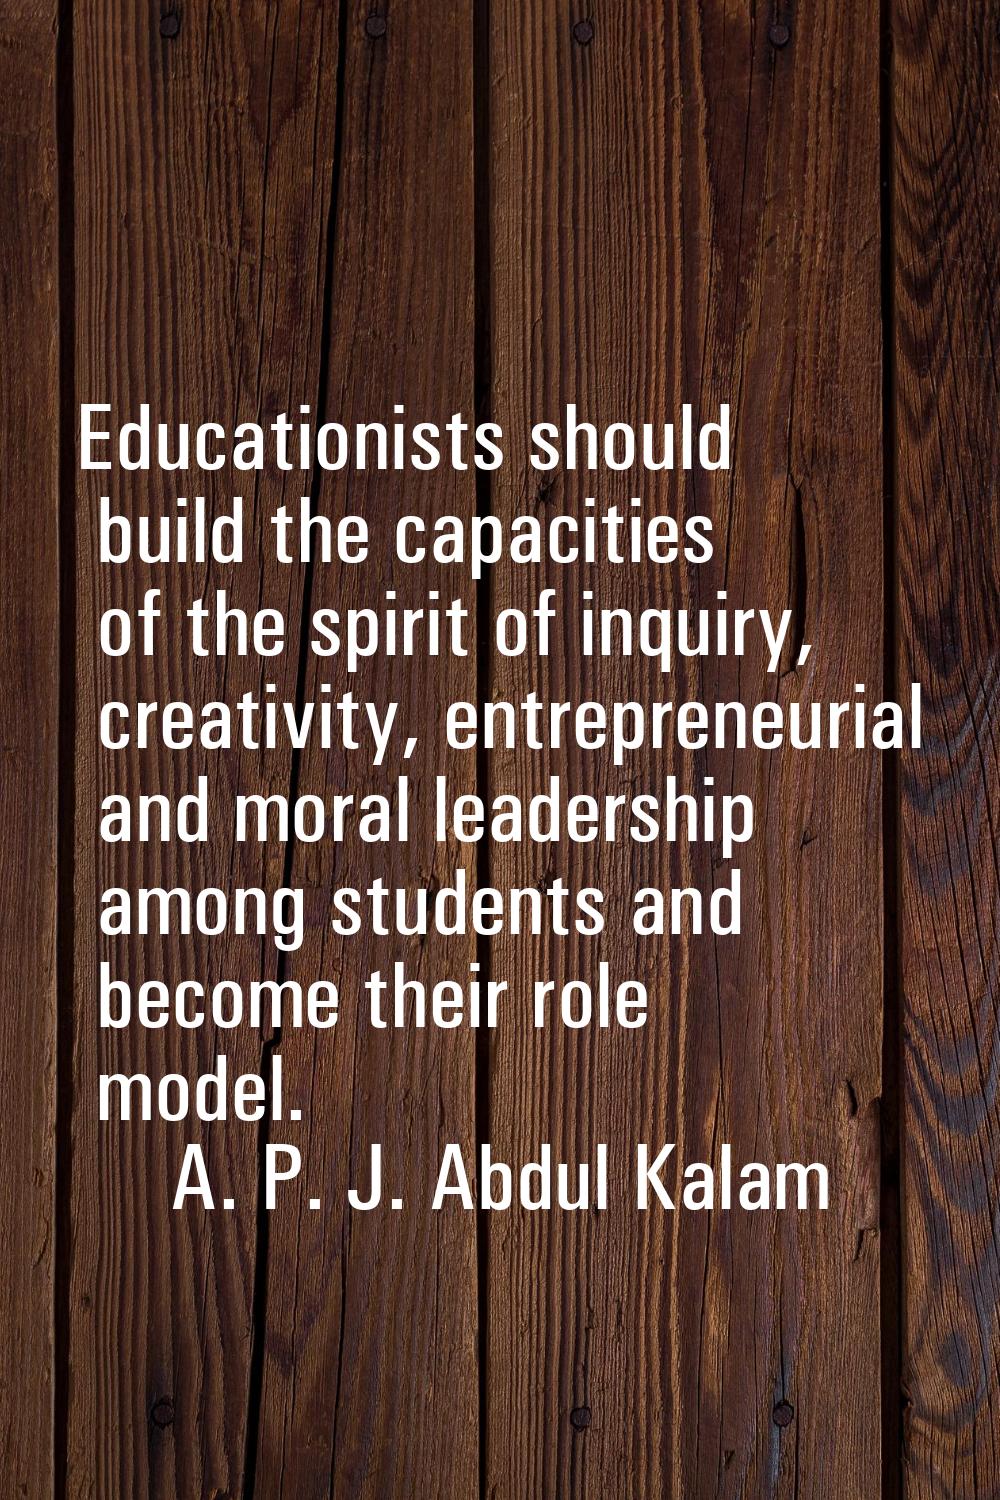 Educationists should build the capacities of the spirit of inquiry, creativity, entrepreneurial and